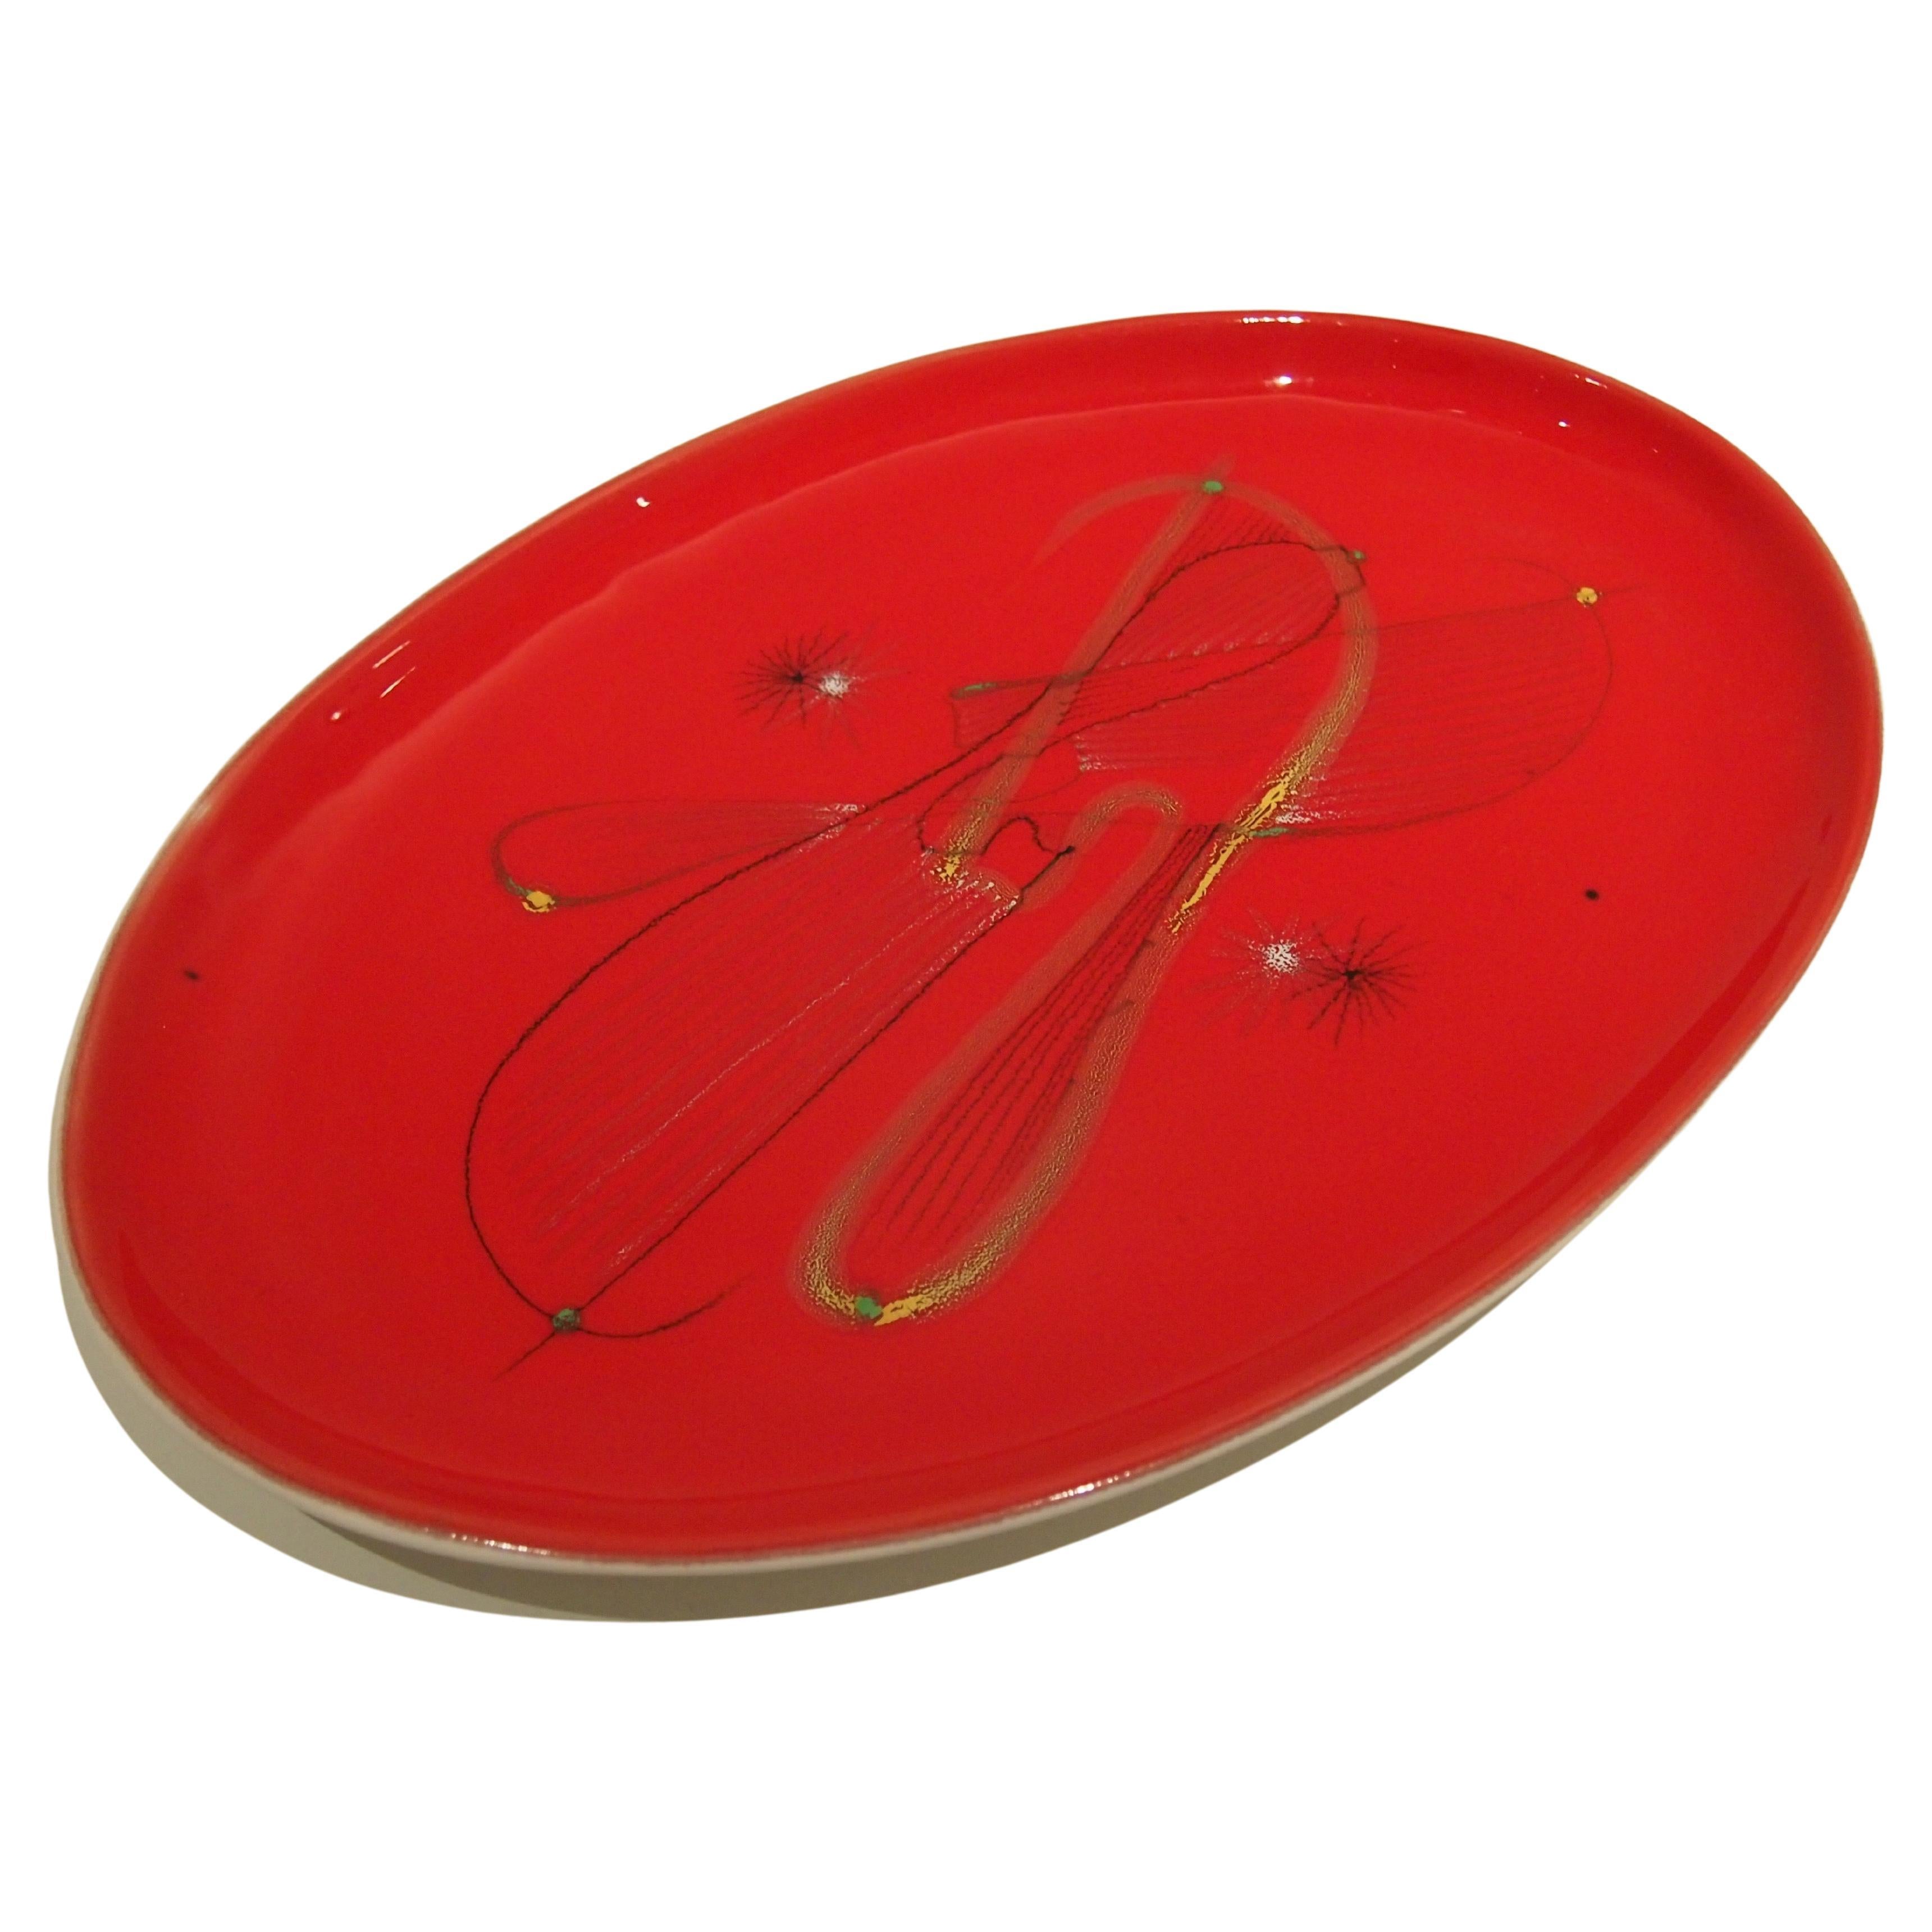 Ceramic Red Dish by André Baud, Vallauris, 1950s